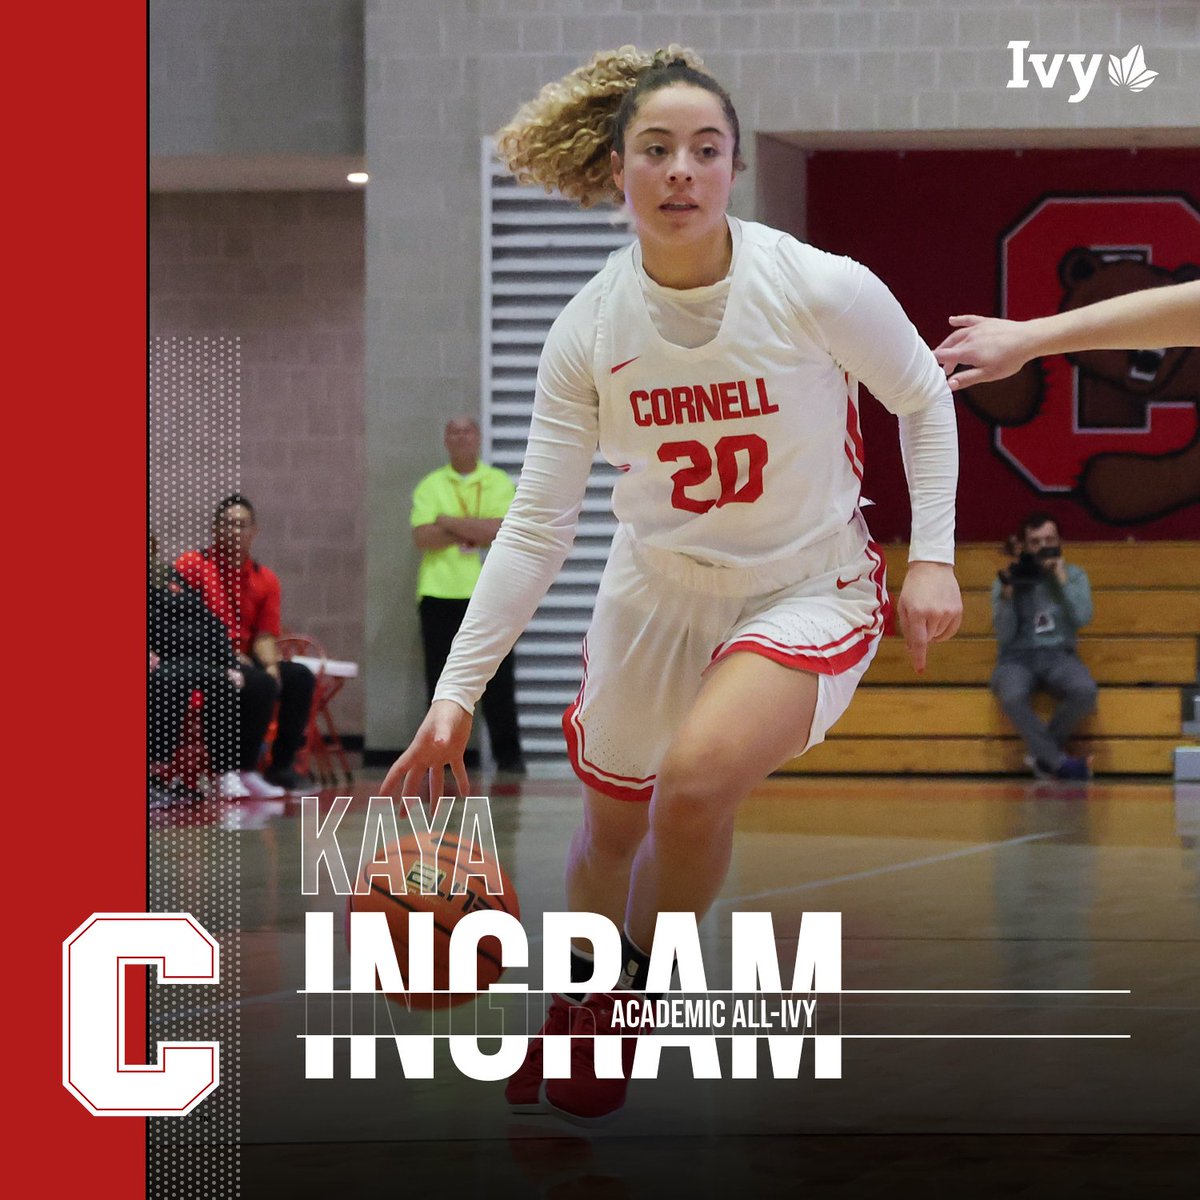 Putting in the work ON and OFF the court 💪 Kaya Ingram is a back-to-back @IvyLeague Academic All-Ivy honoree for @CornellWBB! 📰: bit.ly/3To8mSR #YellCornell